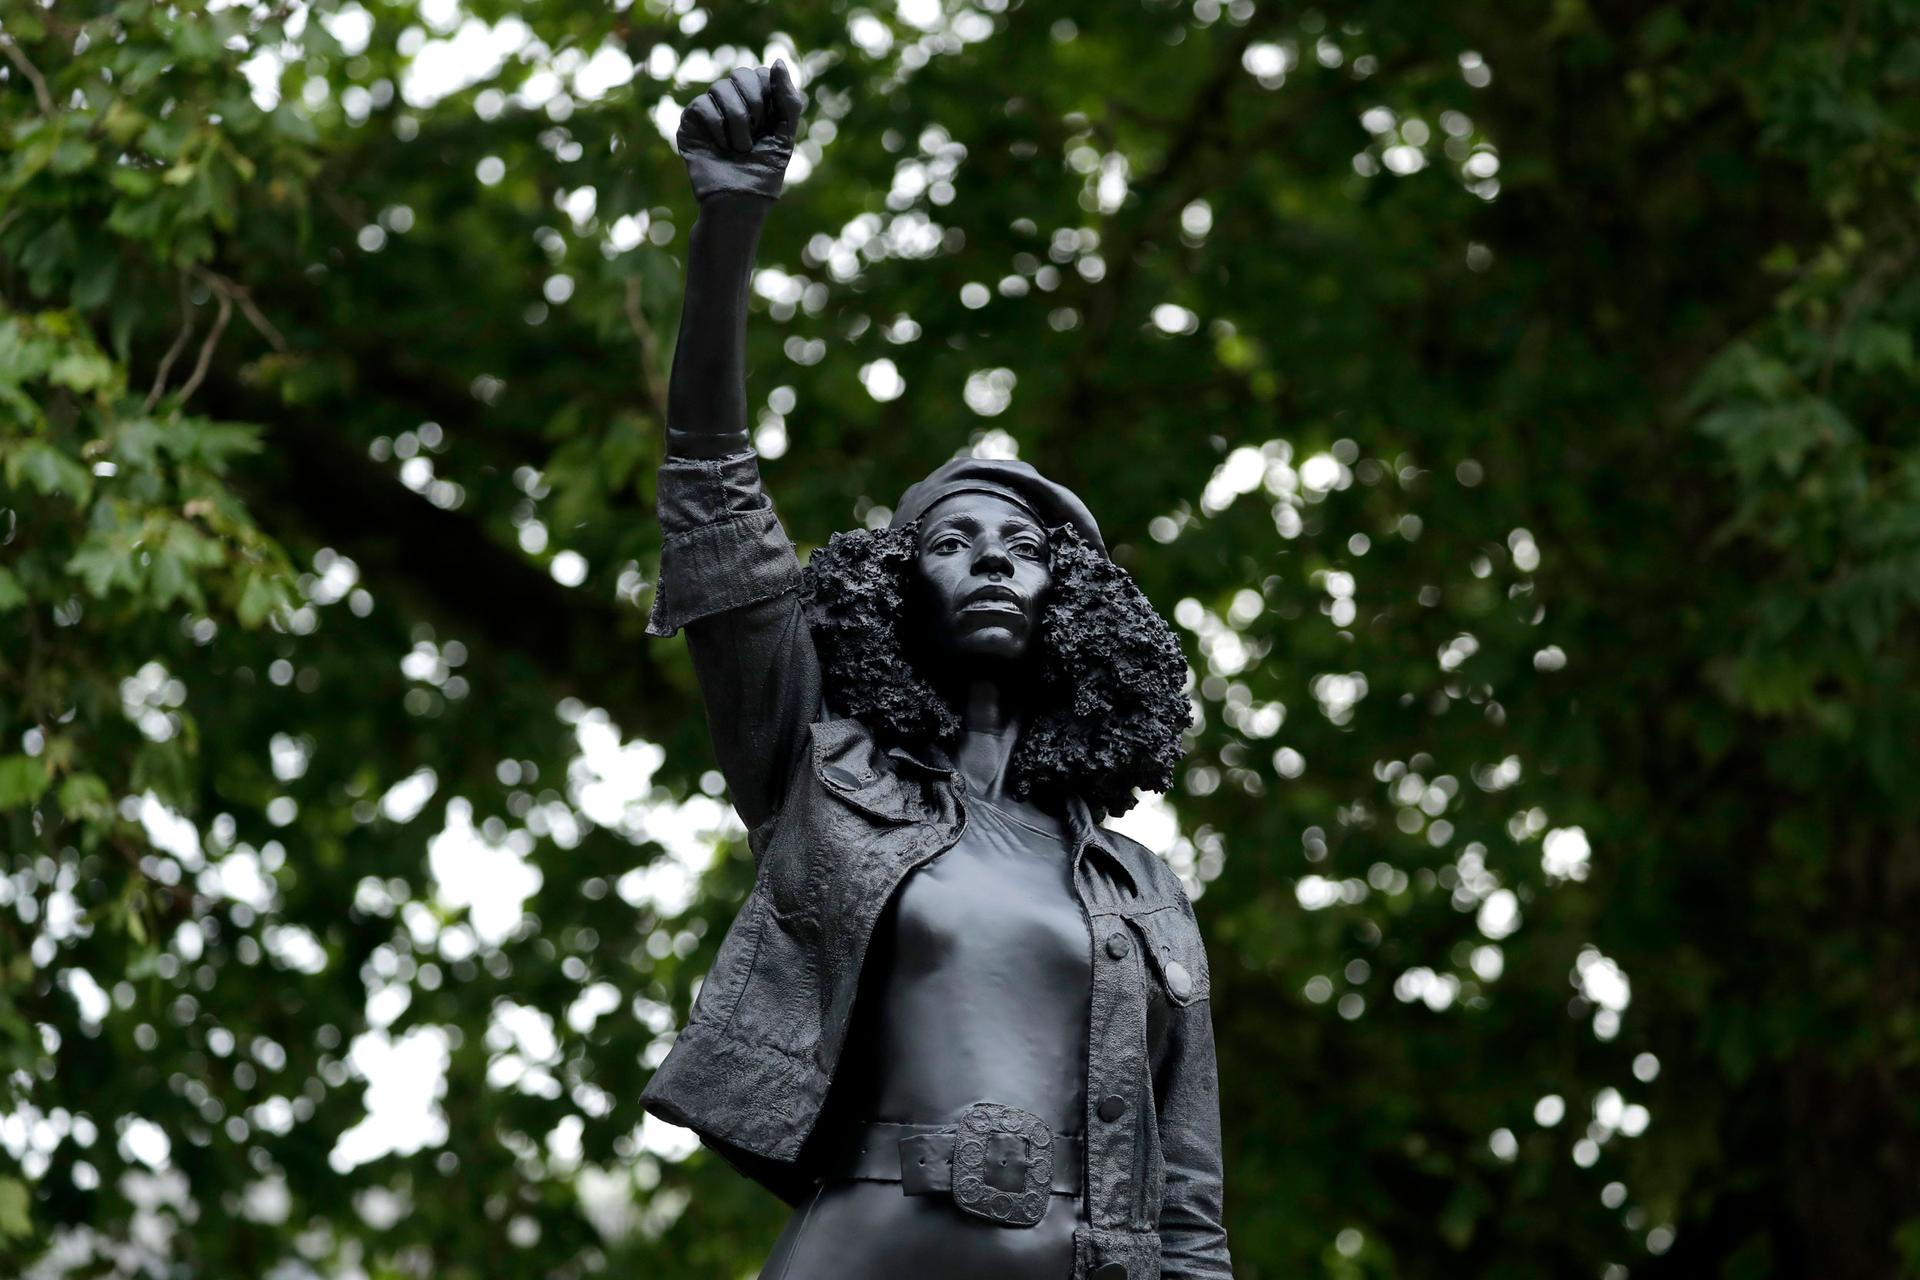 A close-up of a dark statue showing a woman with curly hair, wearing a hat and holding her right fist in the air.